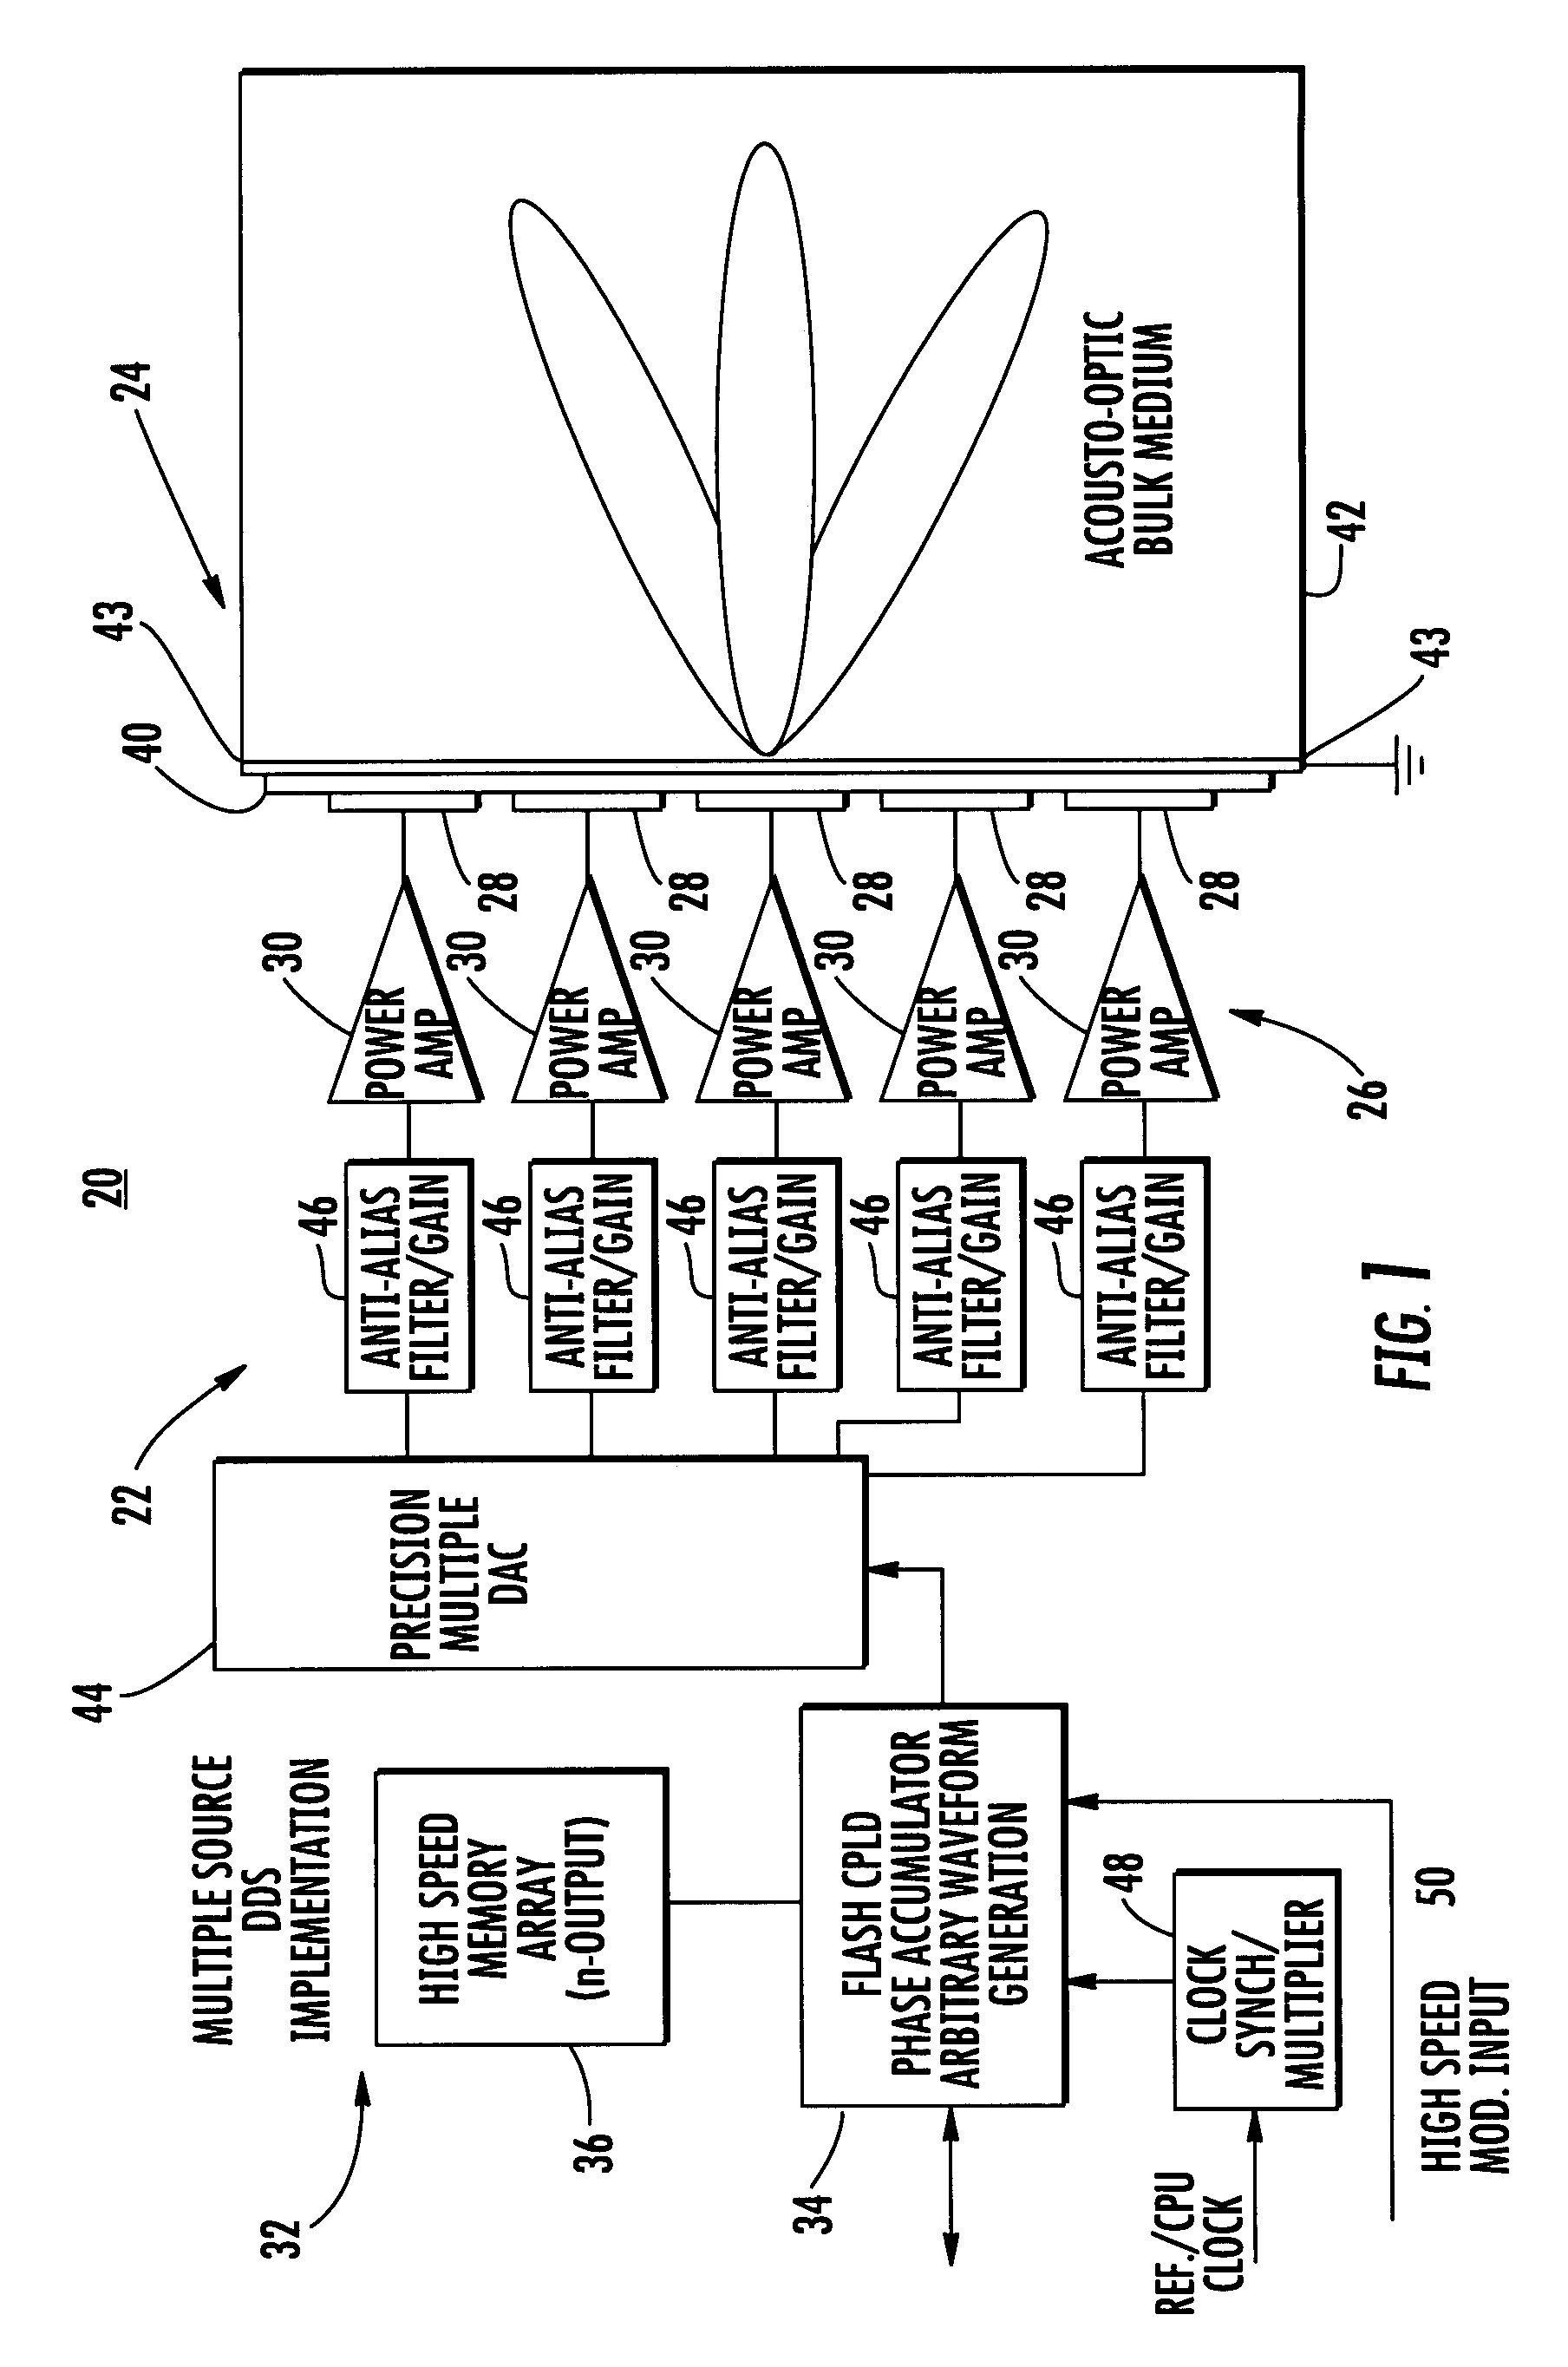 Low cost system and method that implements acousto-optic (AO) RF signal excitation